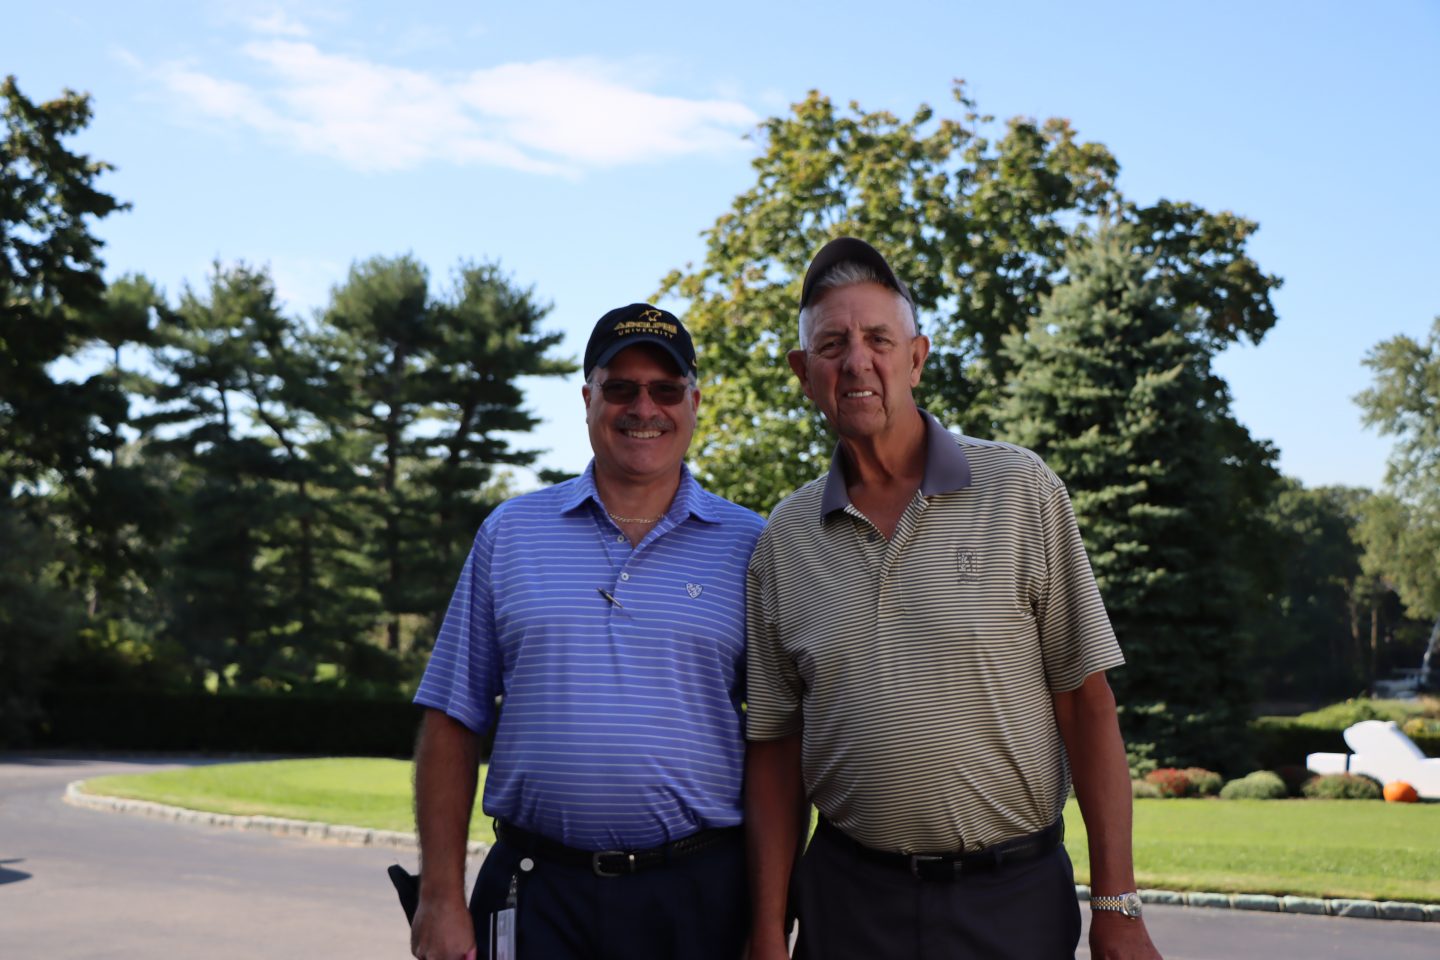 golfers at the annual golf classic